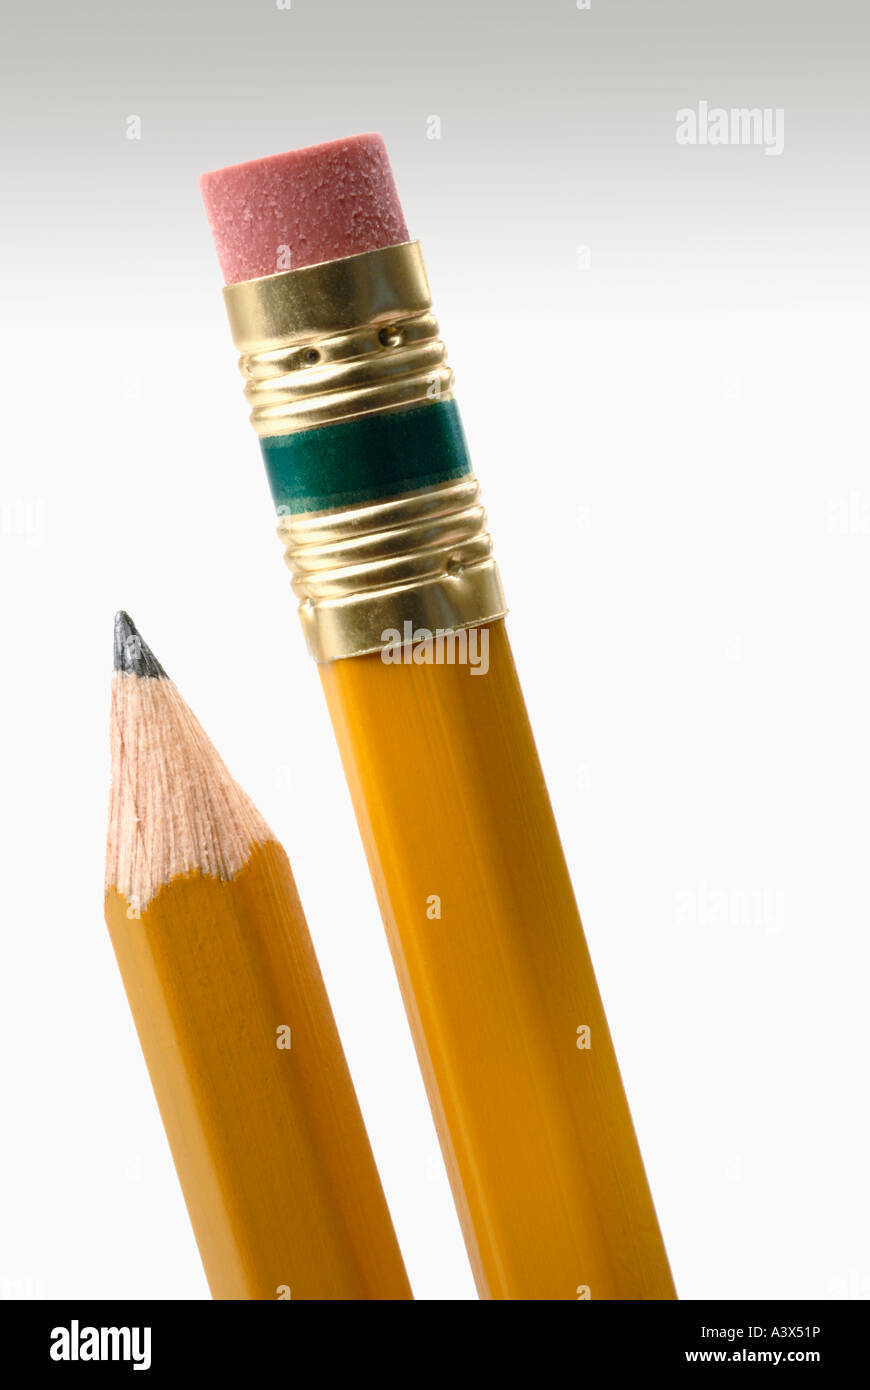 Pencil eraser and point together Stock Photo